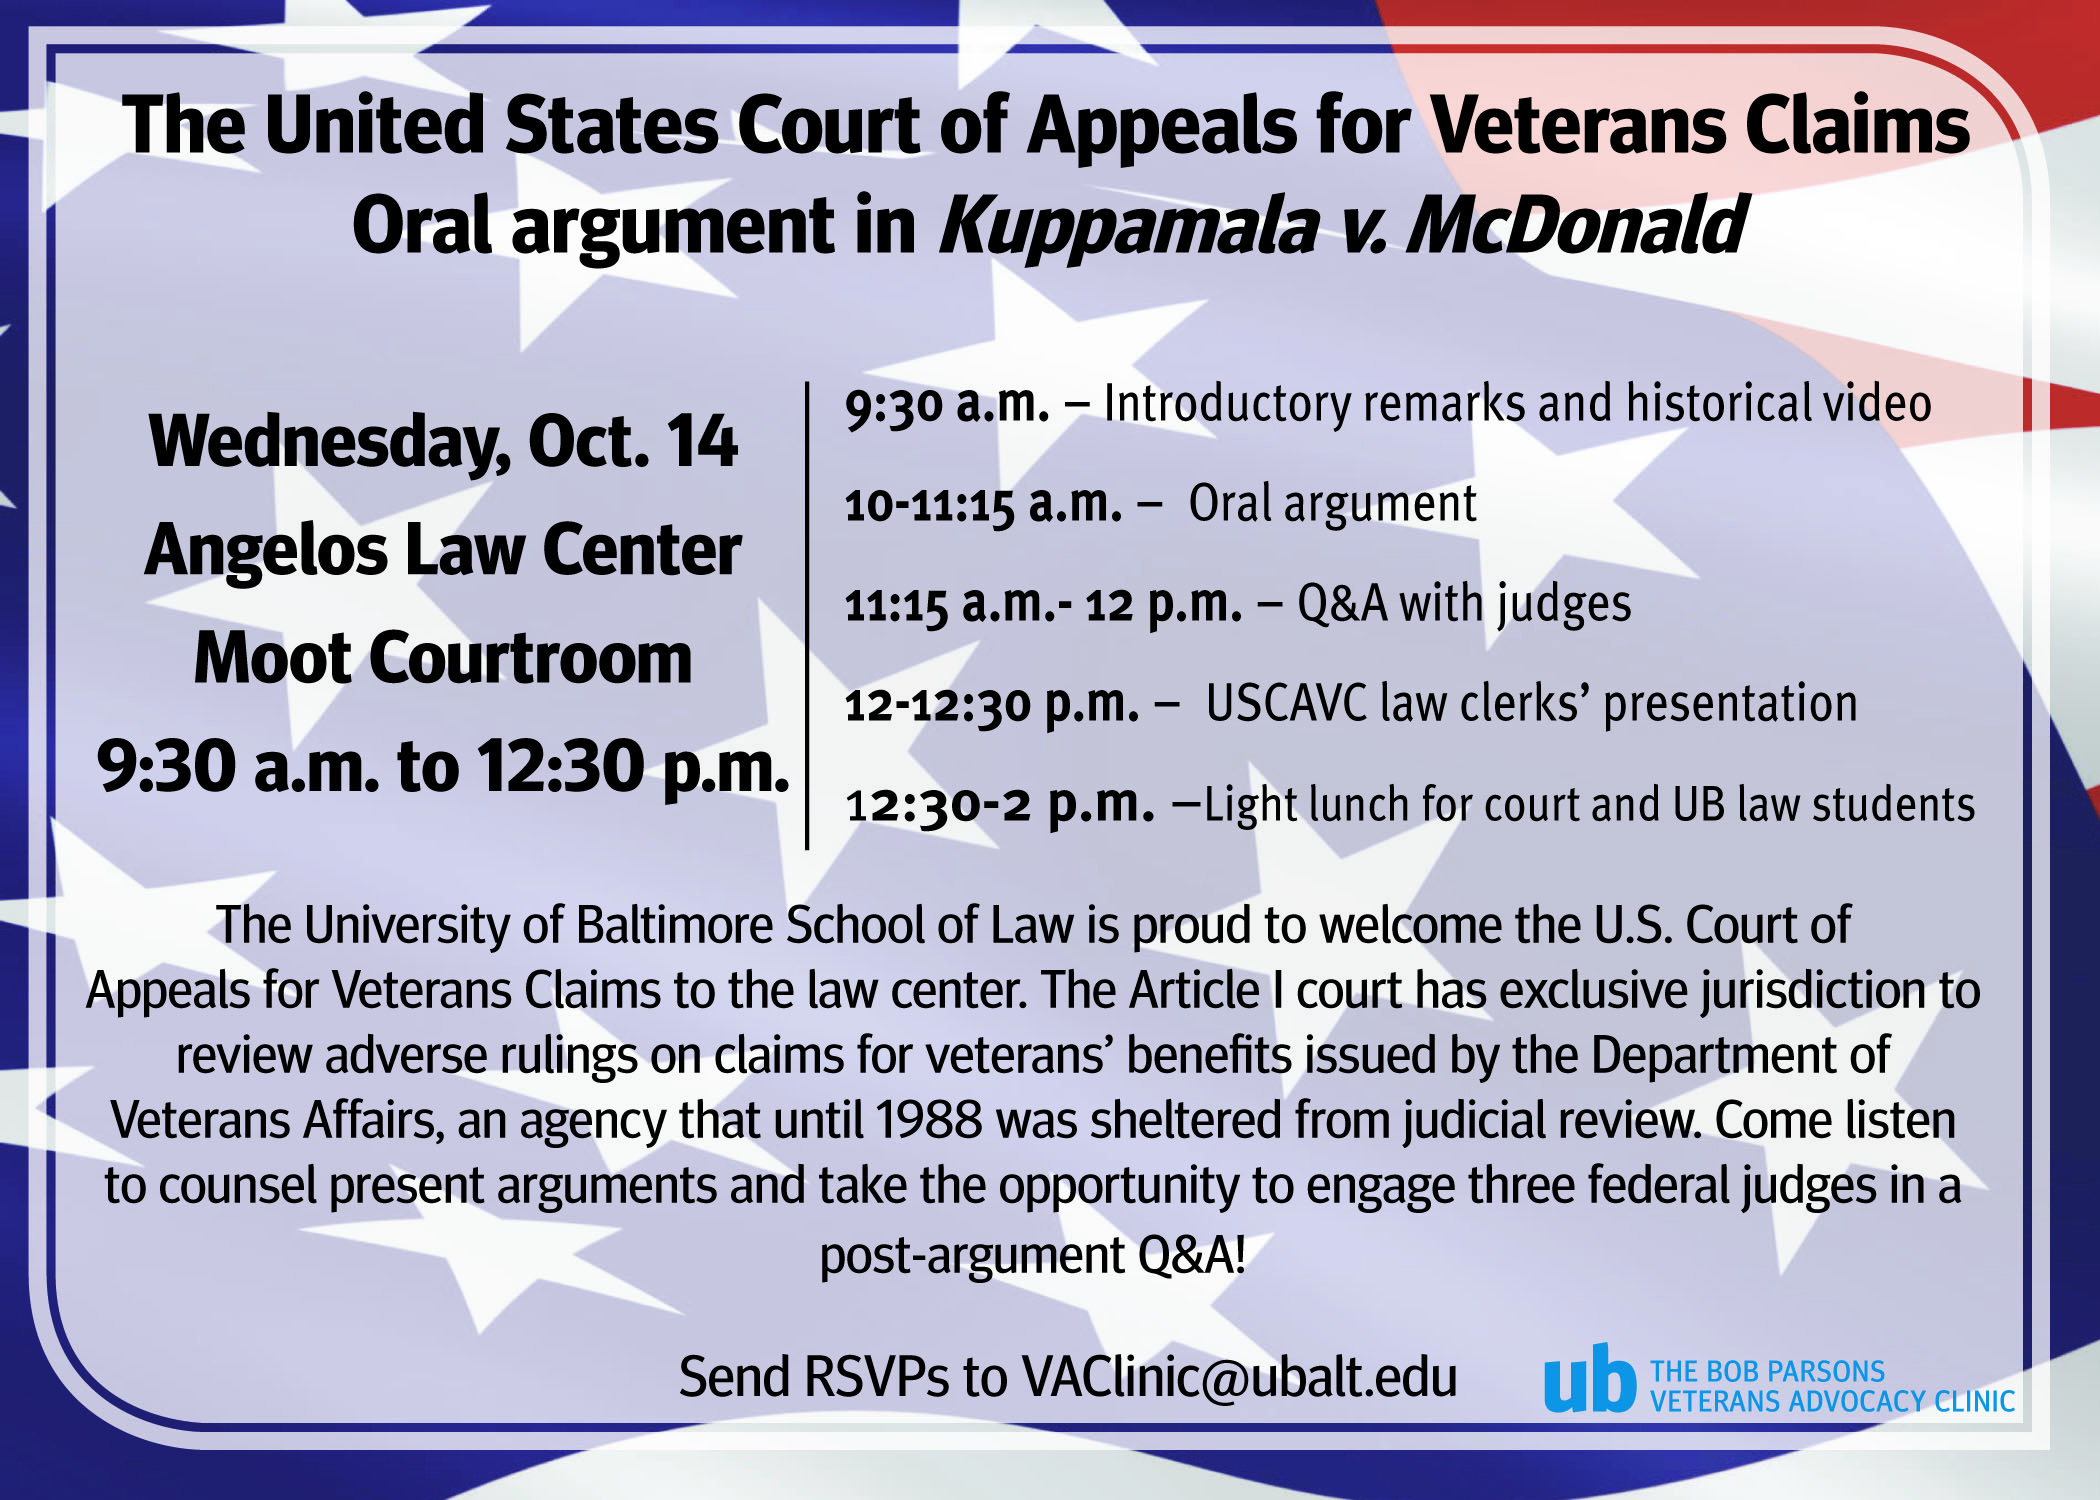 The United States Court of Appeals for Veterans Claims Oral Argument in Kuppamata v. McDonald